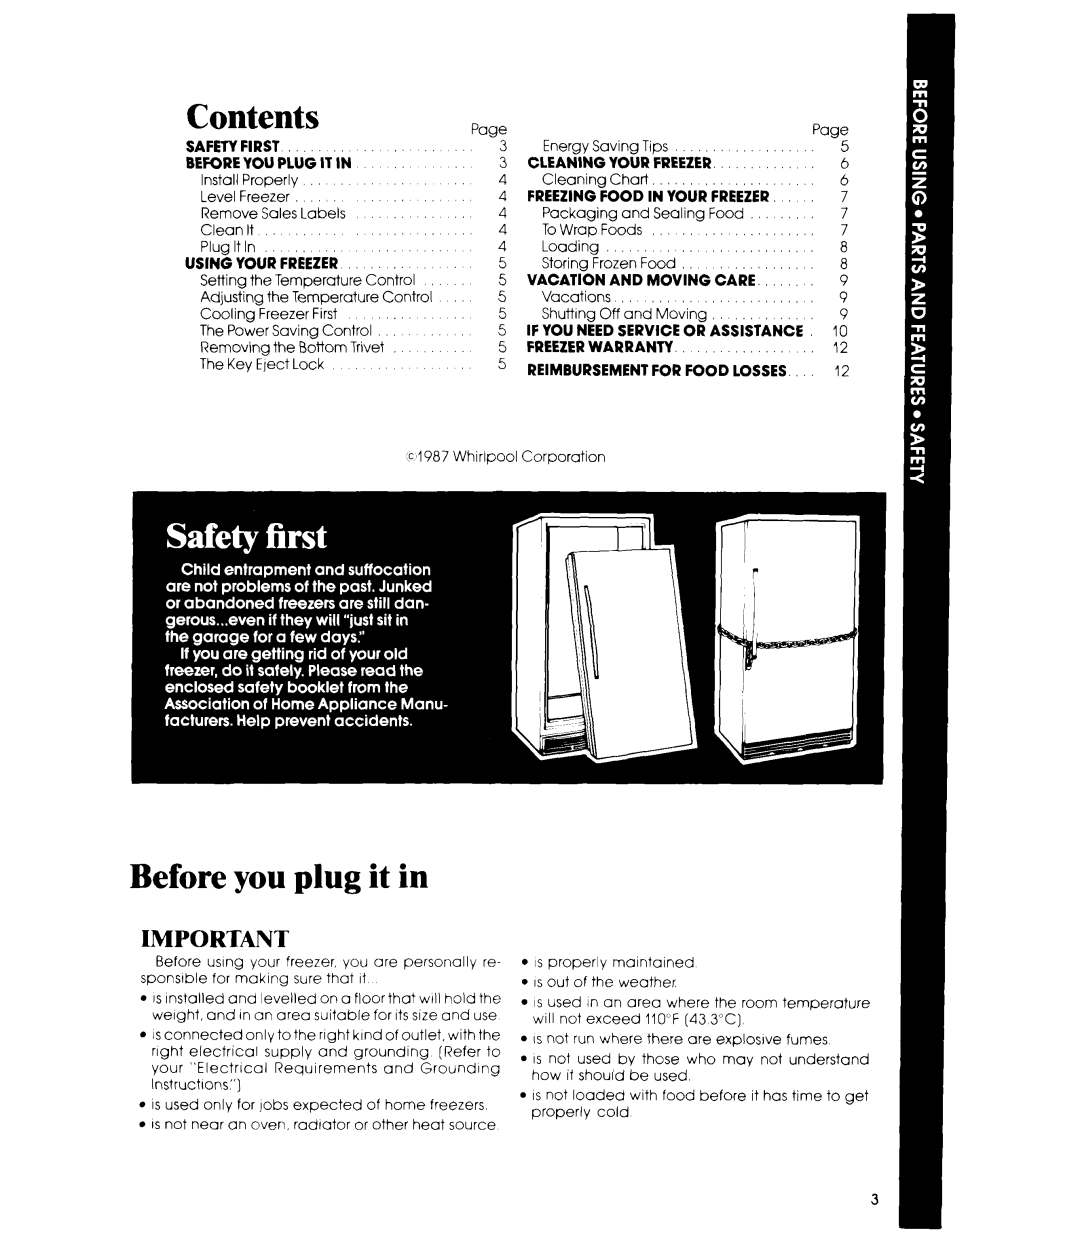 Whirlpool EVISOE manual Before you plug it in, Contents 